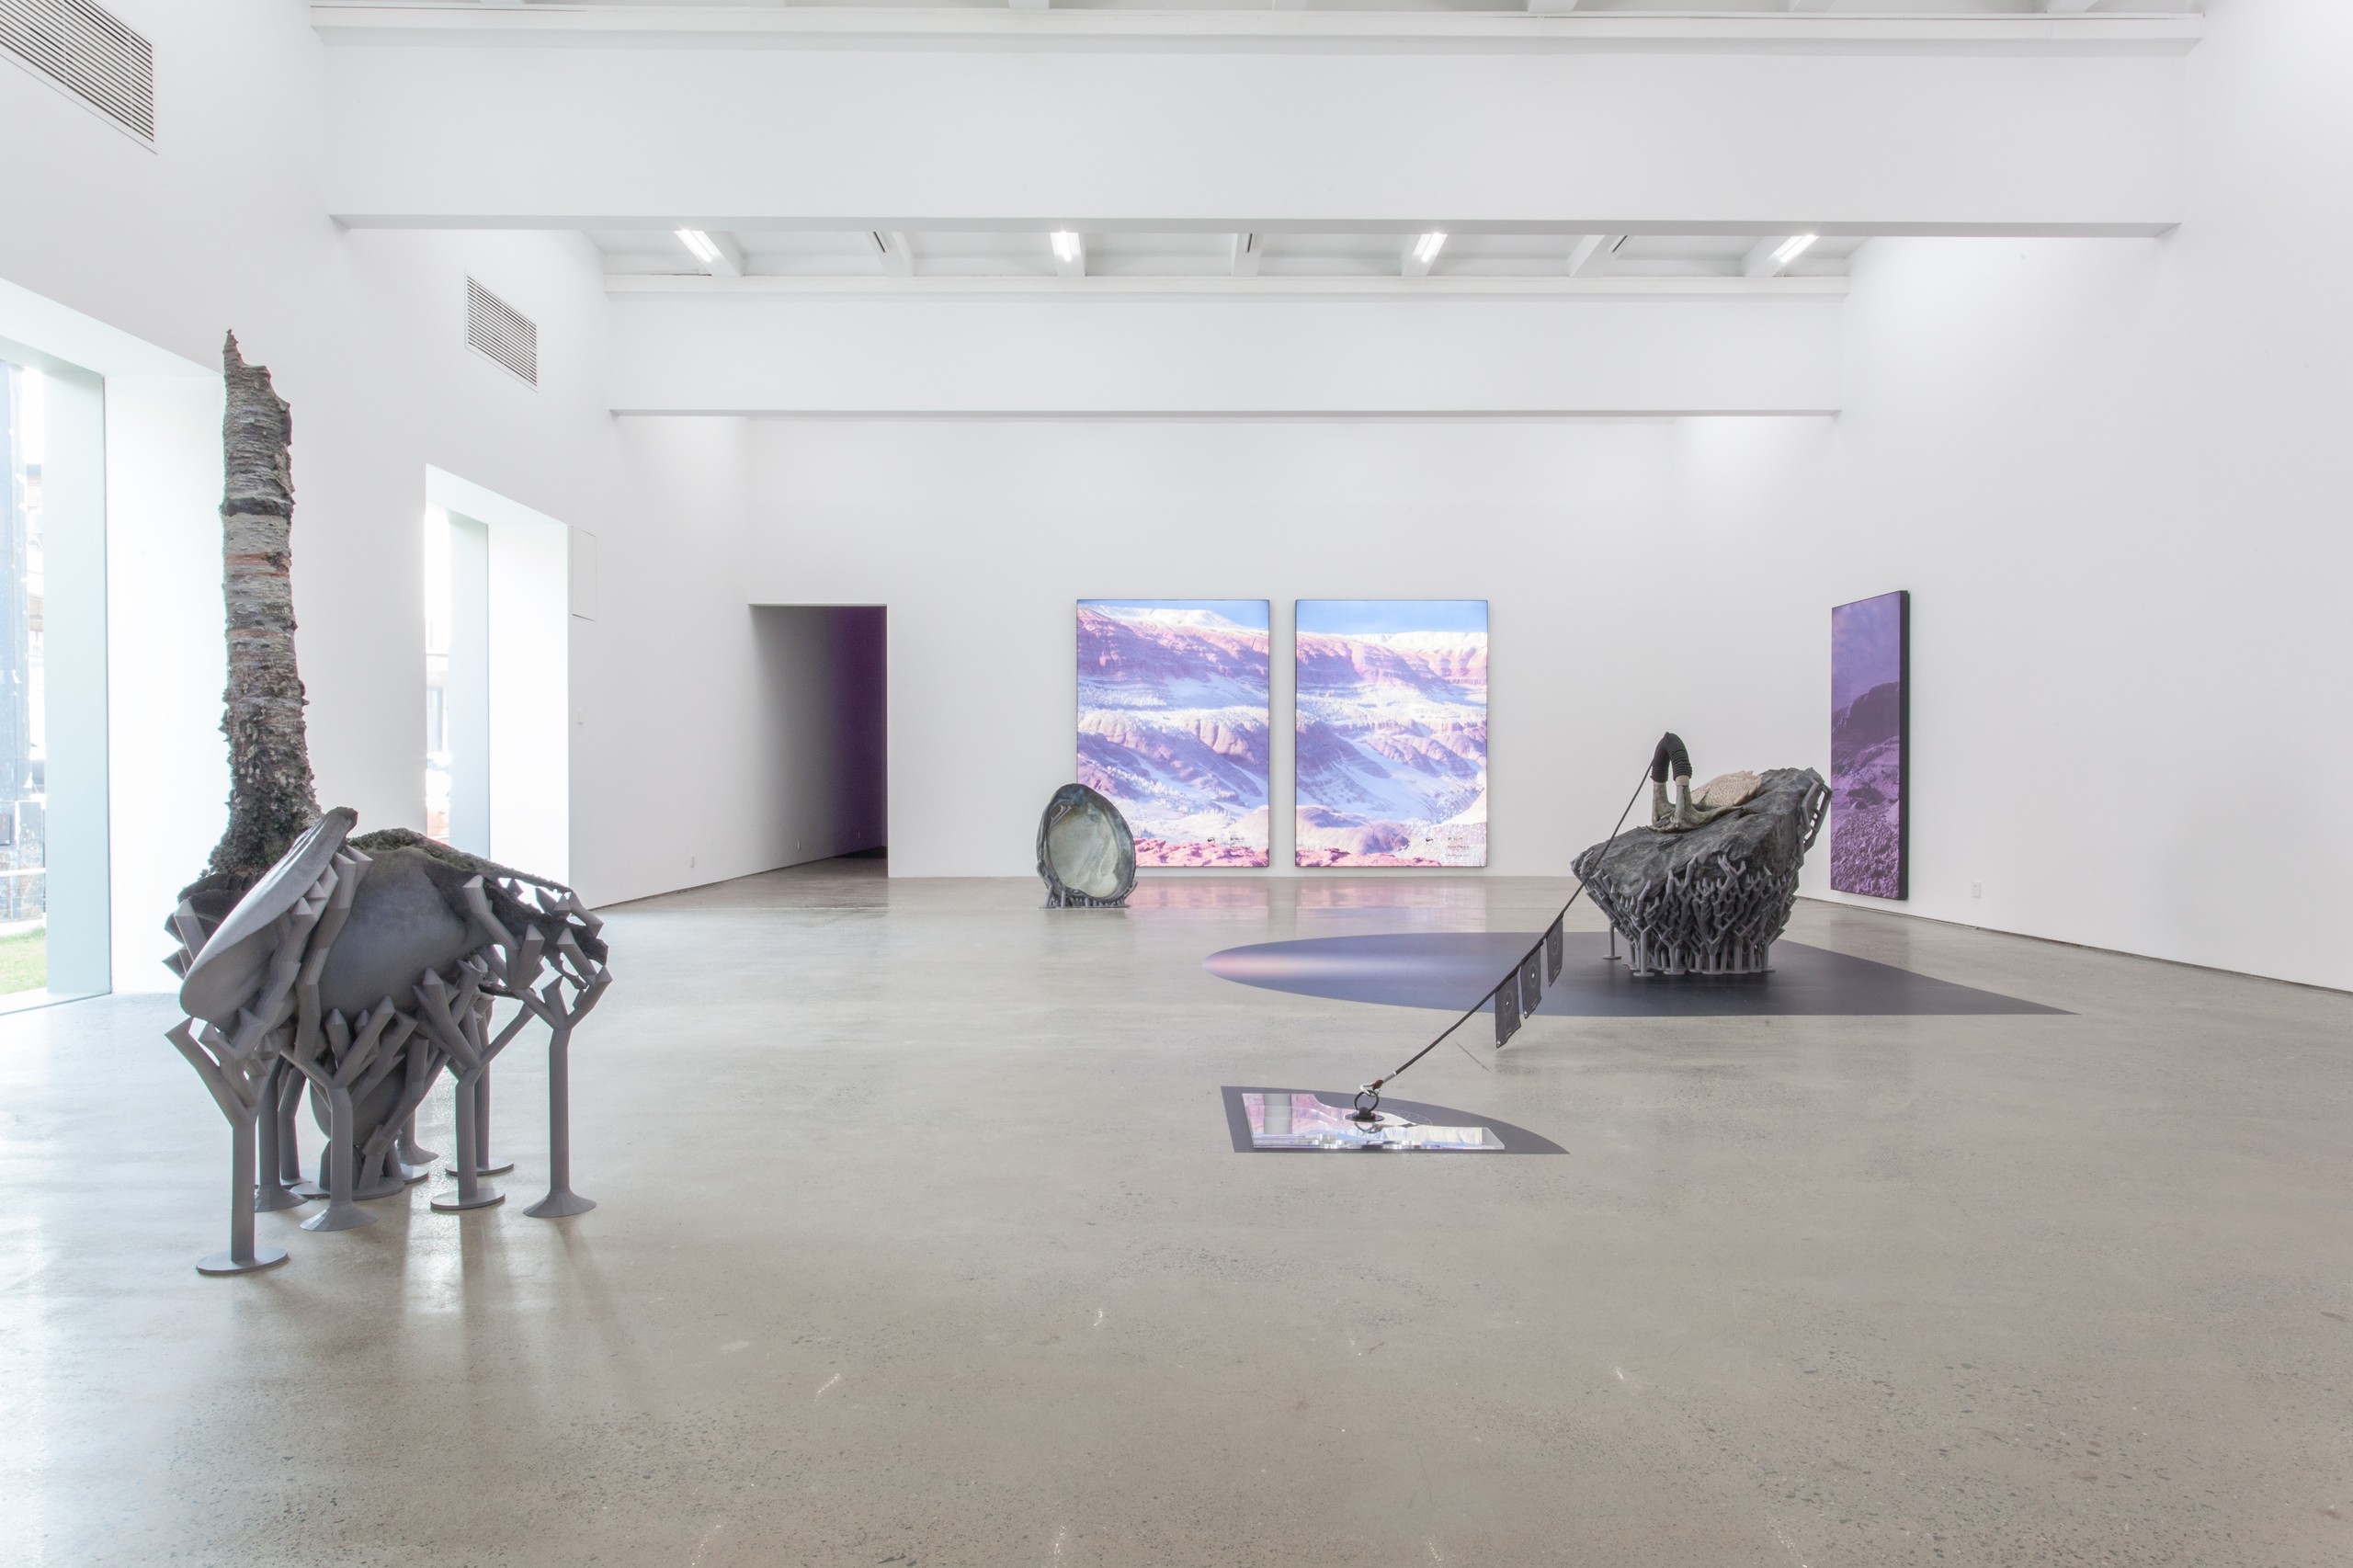 Installation view, East, South, West, North, Magician Space, Beijing, 2018